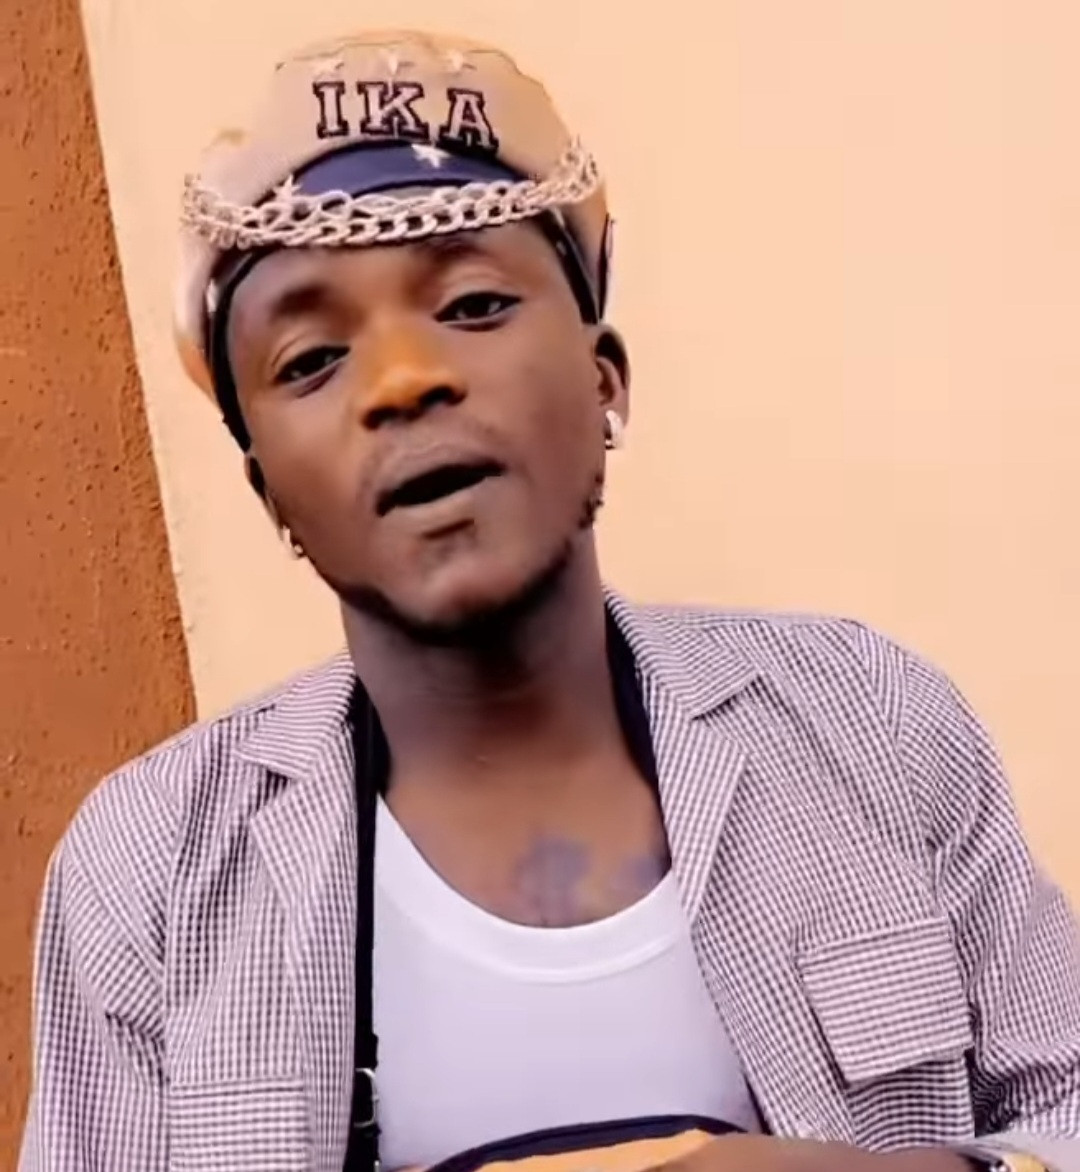 "Don't rip me" Portable accuses Burna Boy of exploiting his intellectual properties (video)